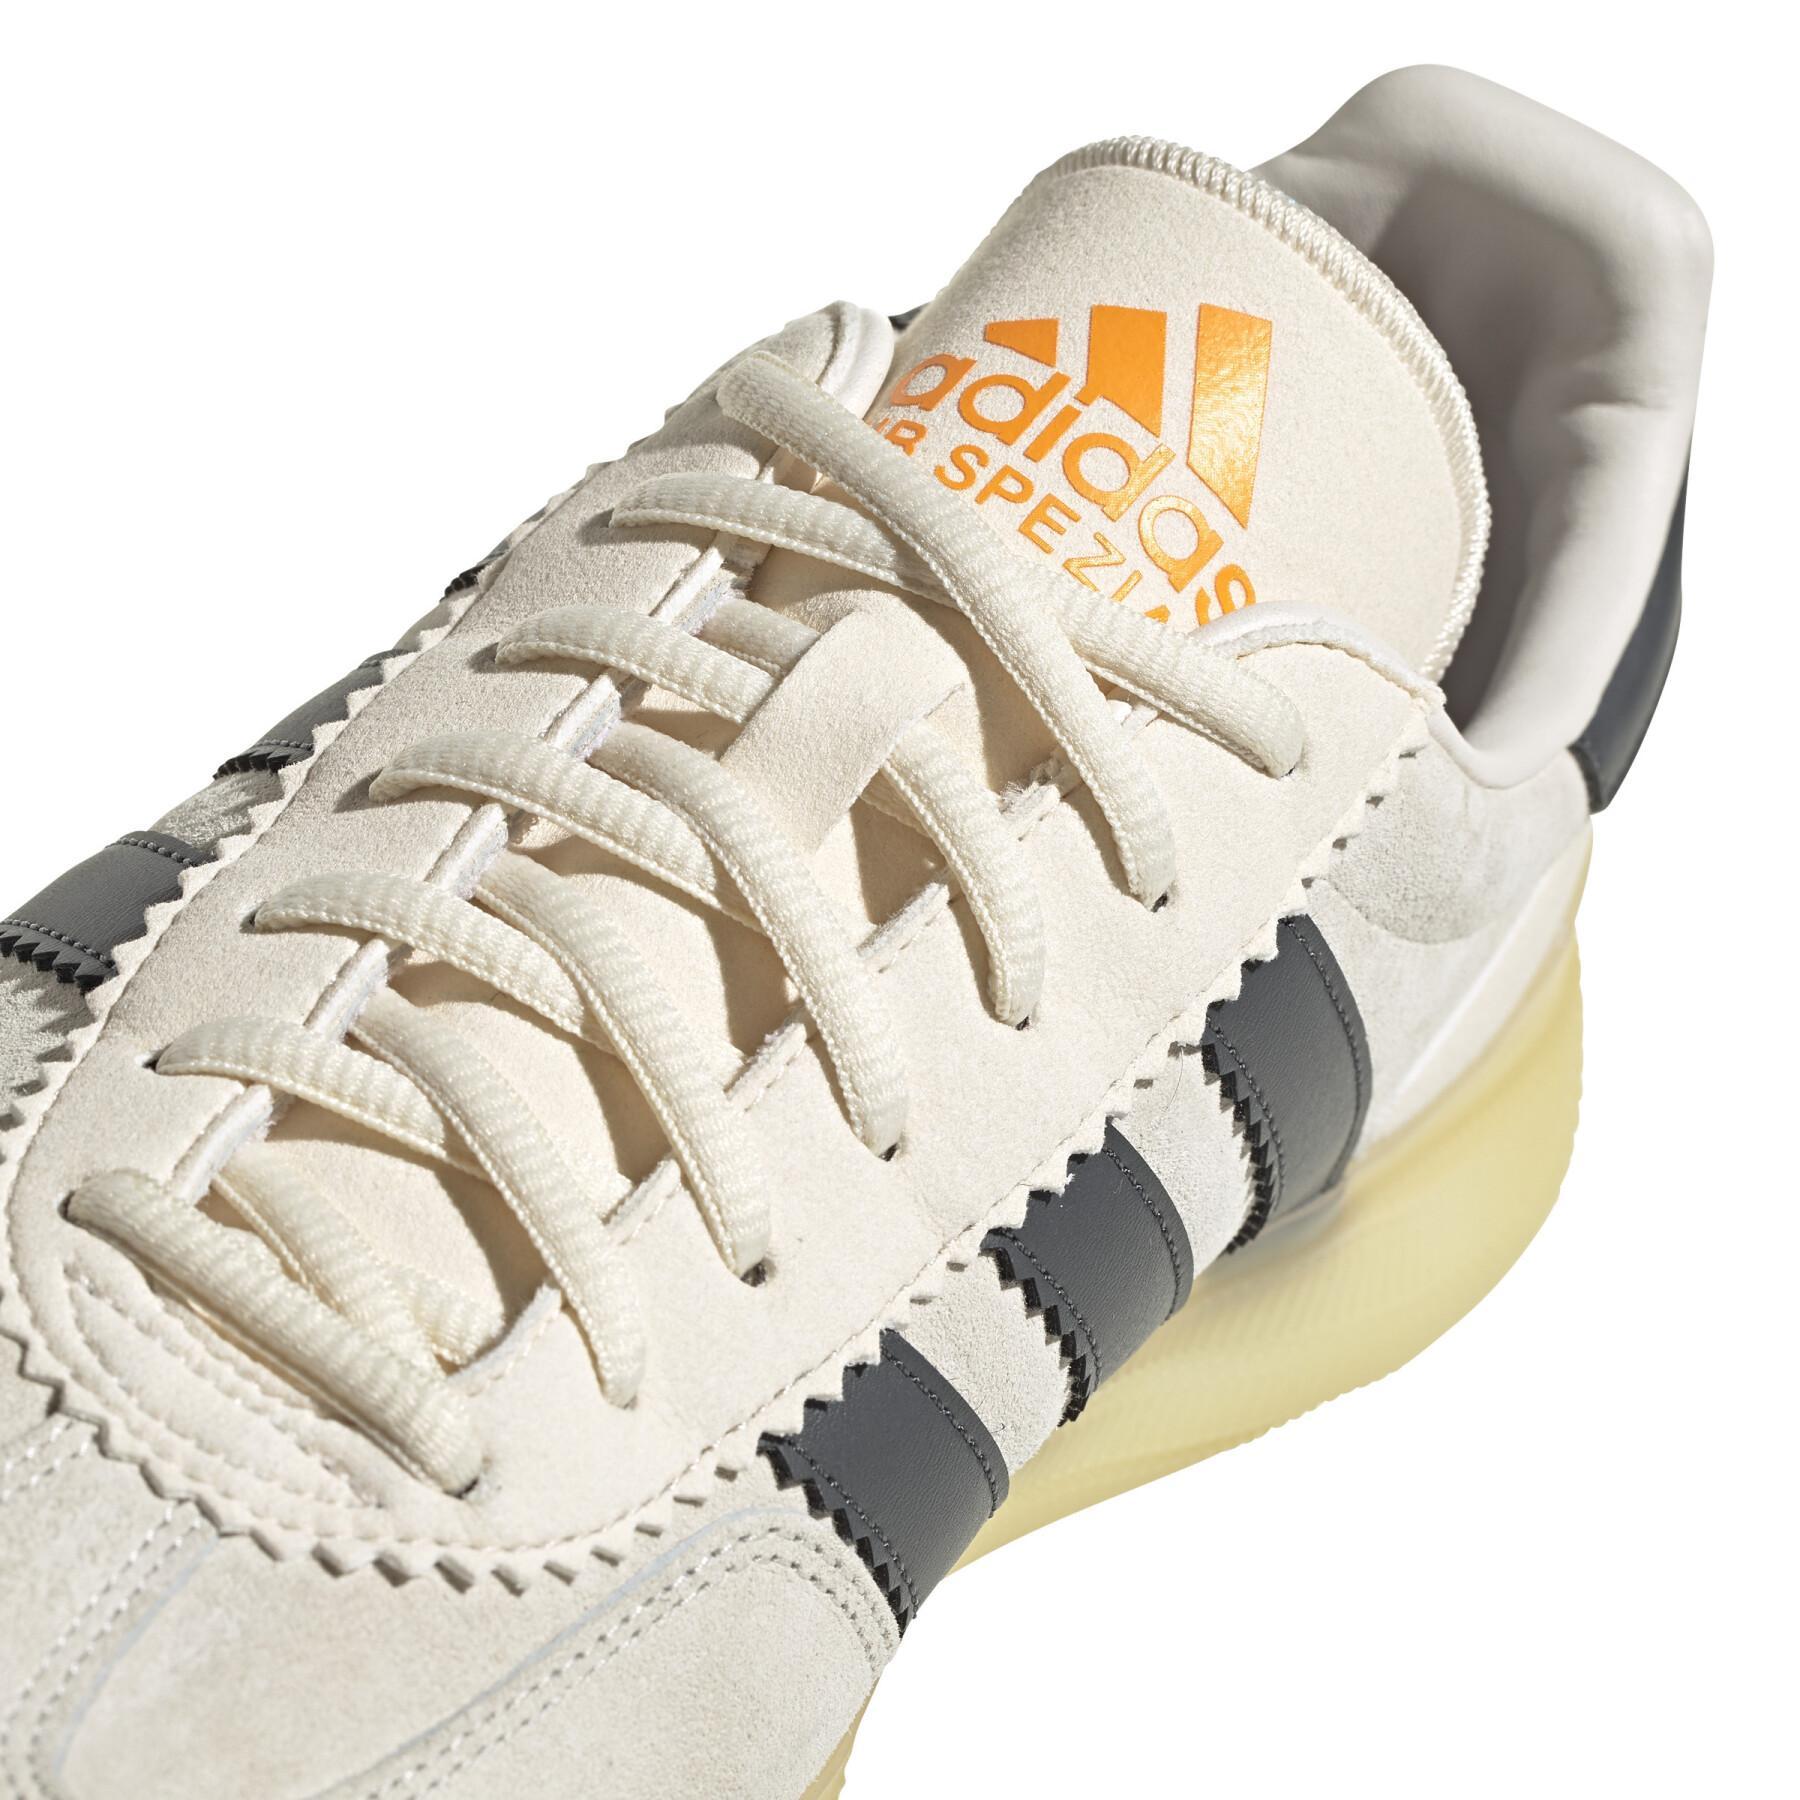 Chaussures adidas Spezial Boost